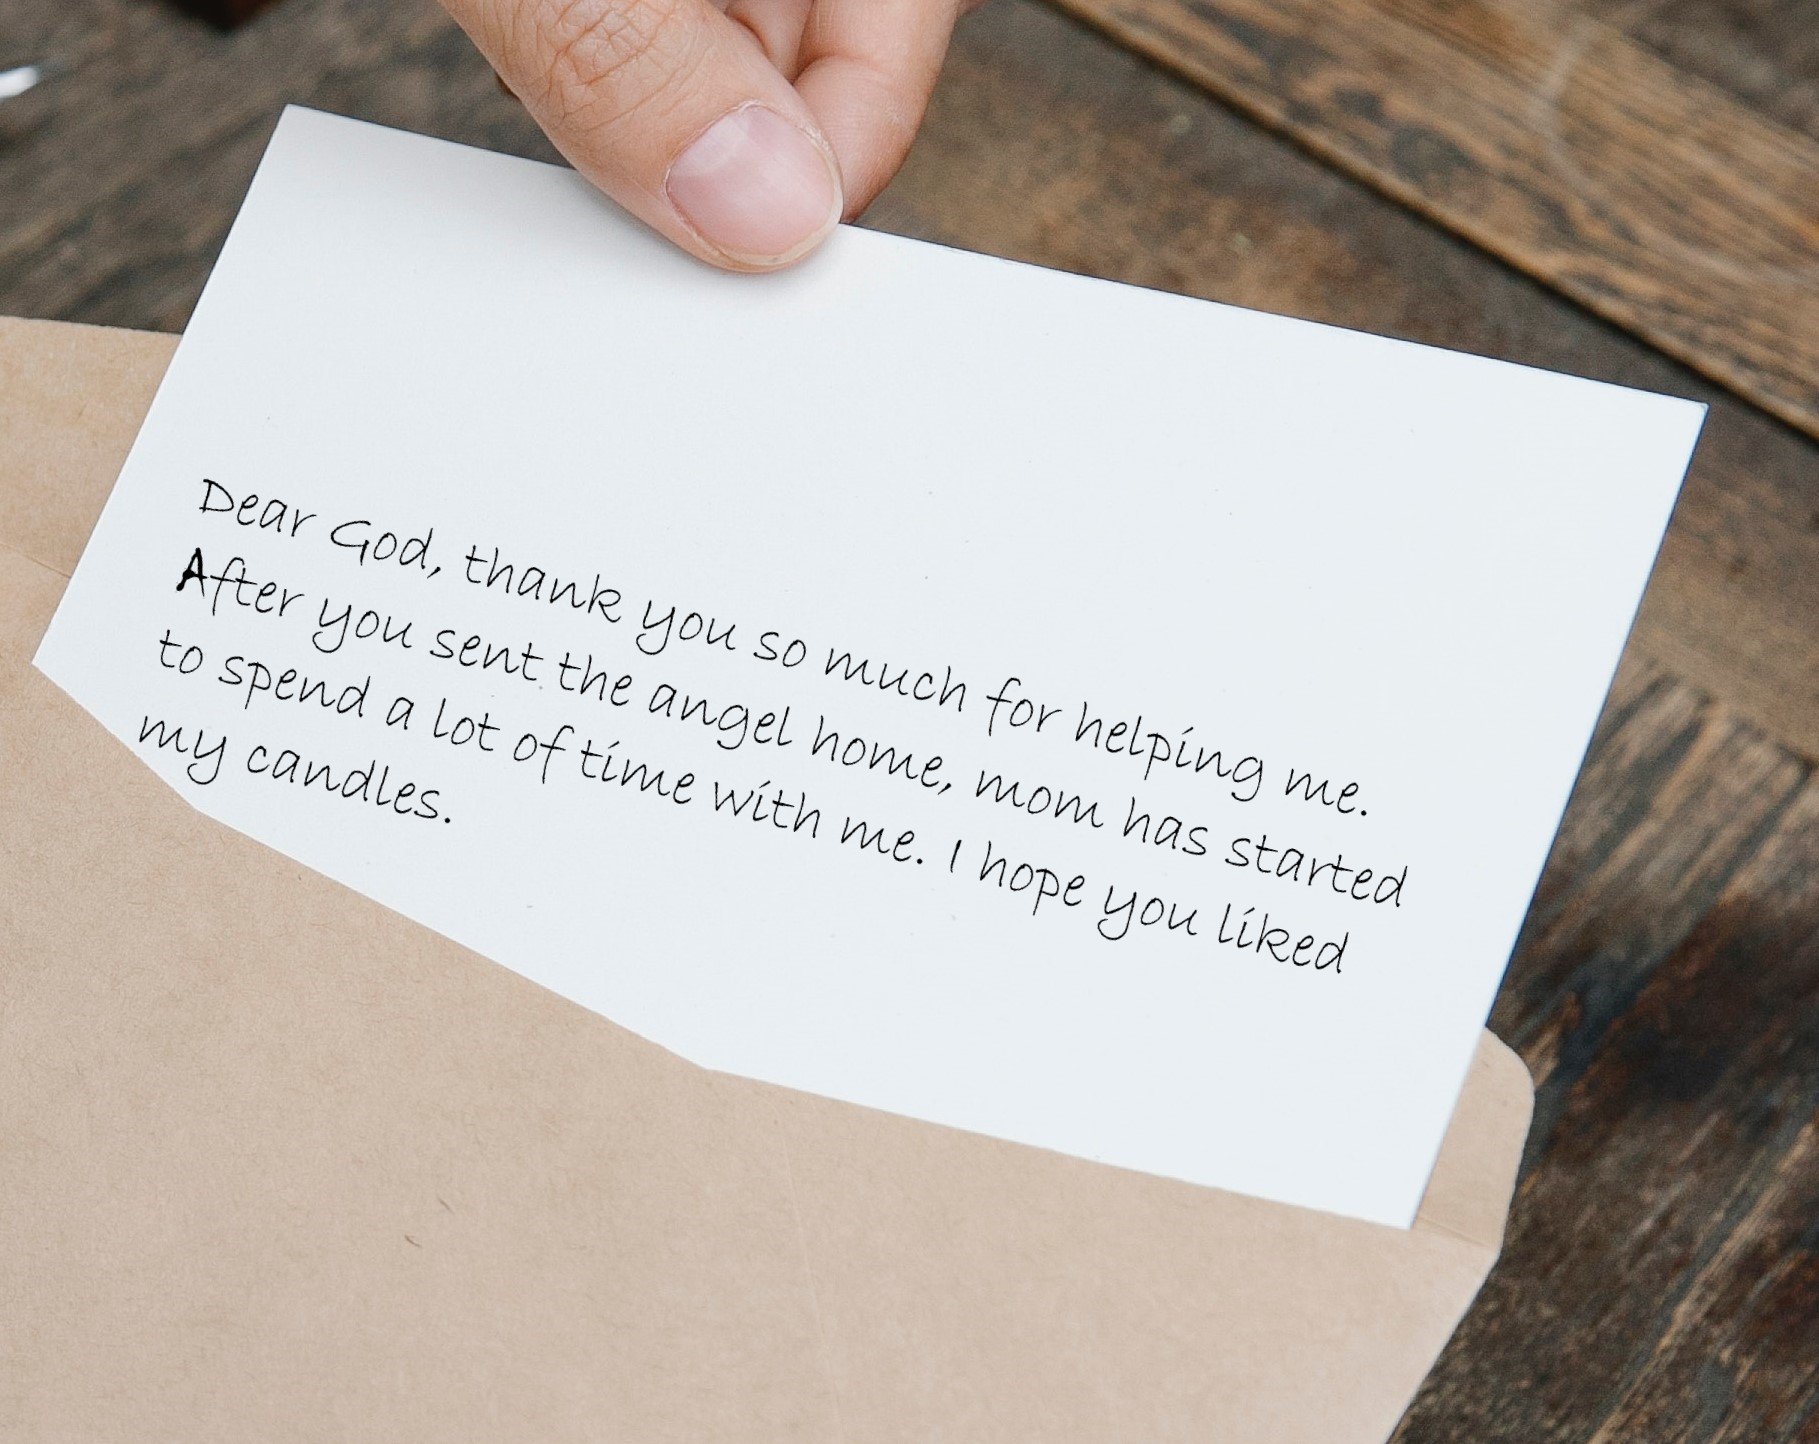 The kind mailman was once again moved by the little one's thank you letter to God. | Source: Pexels